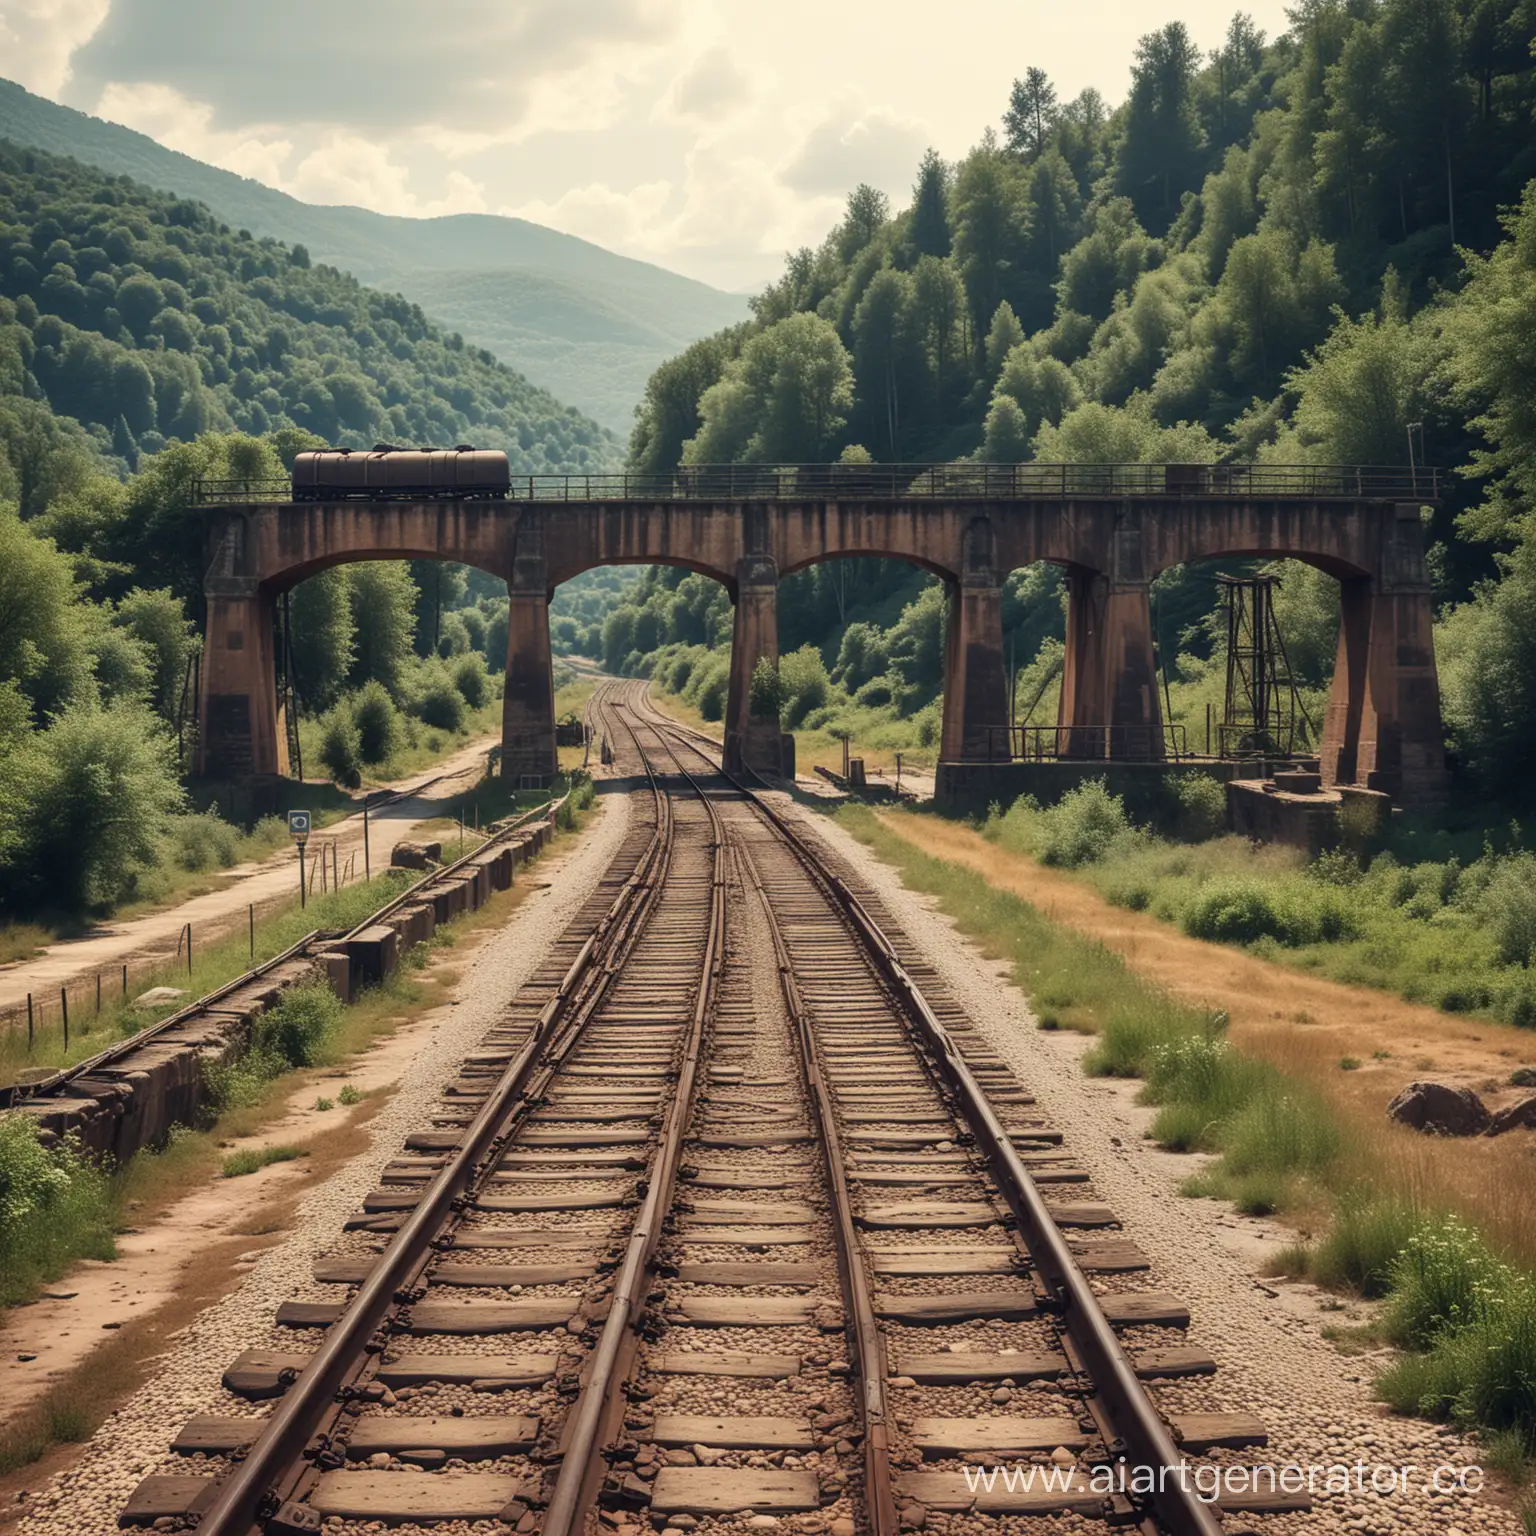 Ancient-PaganStyle-Forum-Clodii-Railway-Platform-with-Mountain-and-Forest-View